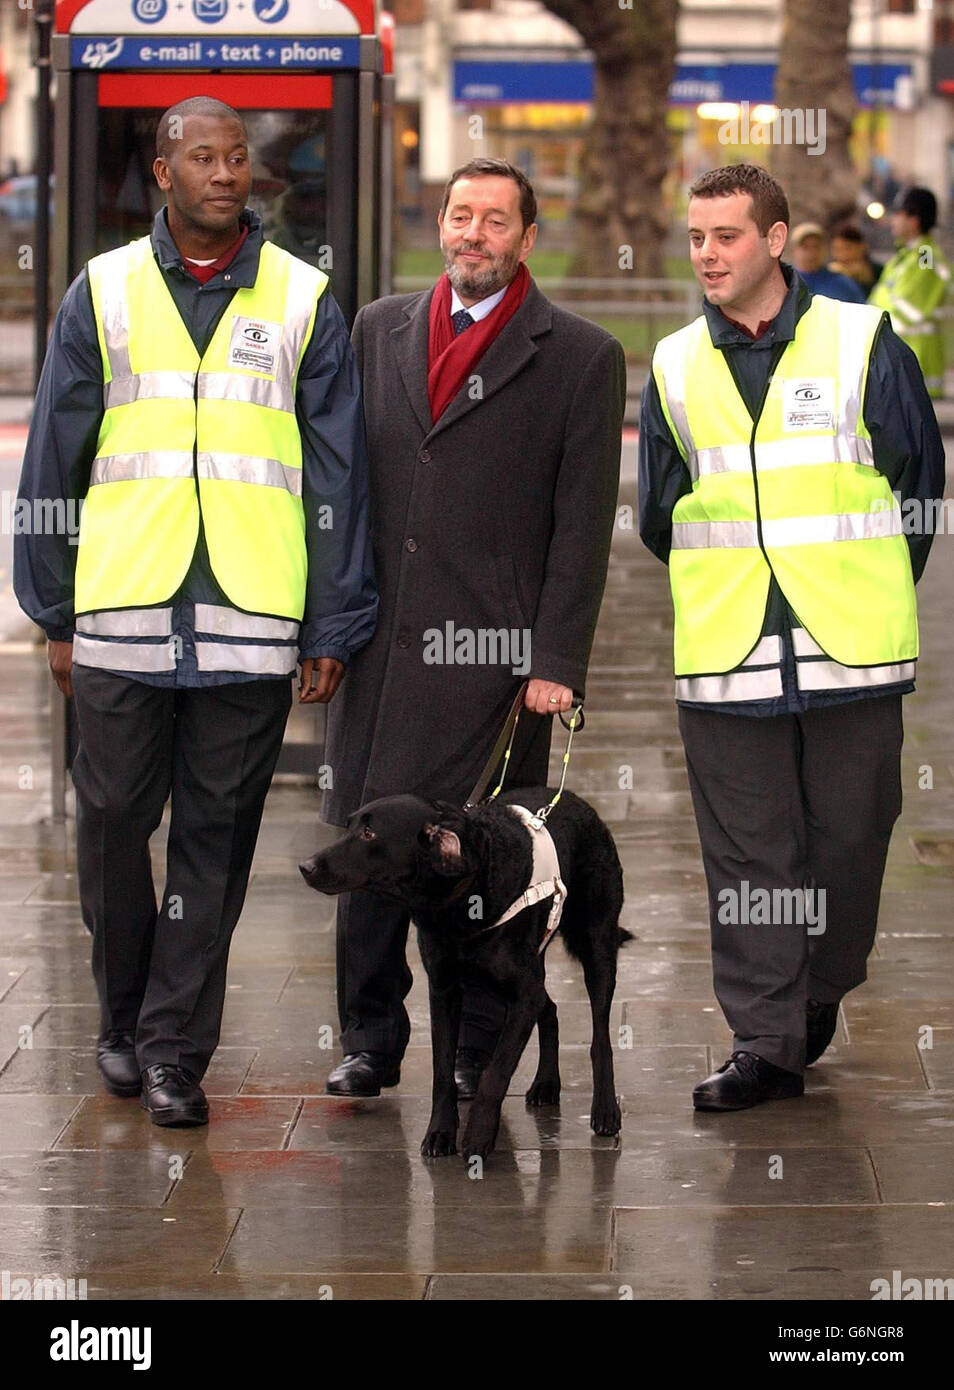 Home Secretary David Blunkett walks with Street Wardens Simeon Whatford (Right) and Sean Mullins (Left) in Shepherd's Bush, west London, as the Government launched new a new law to crack down on anti-social behaviour. Under new powers, police officers will be able to close down crack houses within 48 hours and keep them shut for up to six months and accredited private security guards will be able to stop cyclists for riding on the pavement. Stock Photo